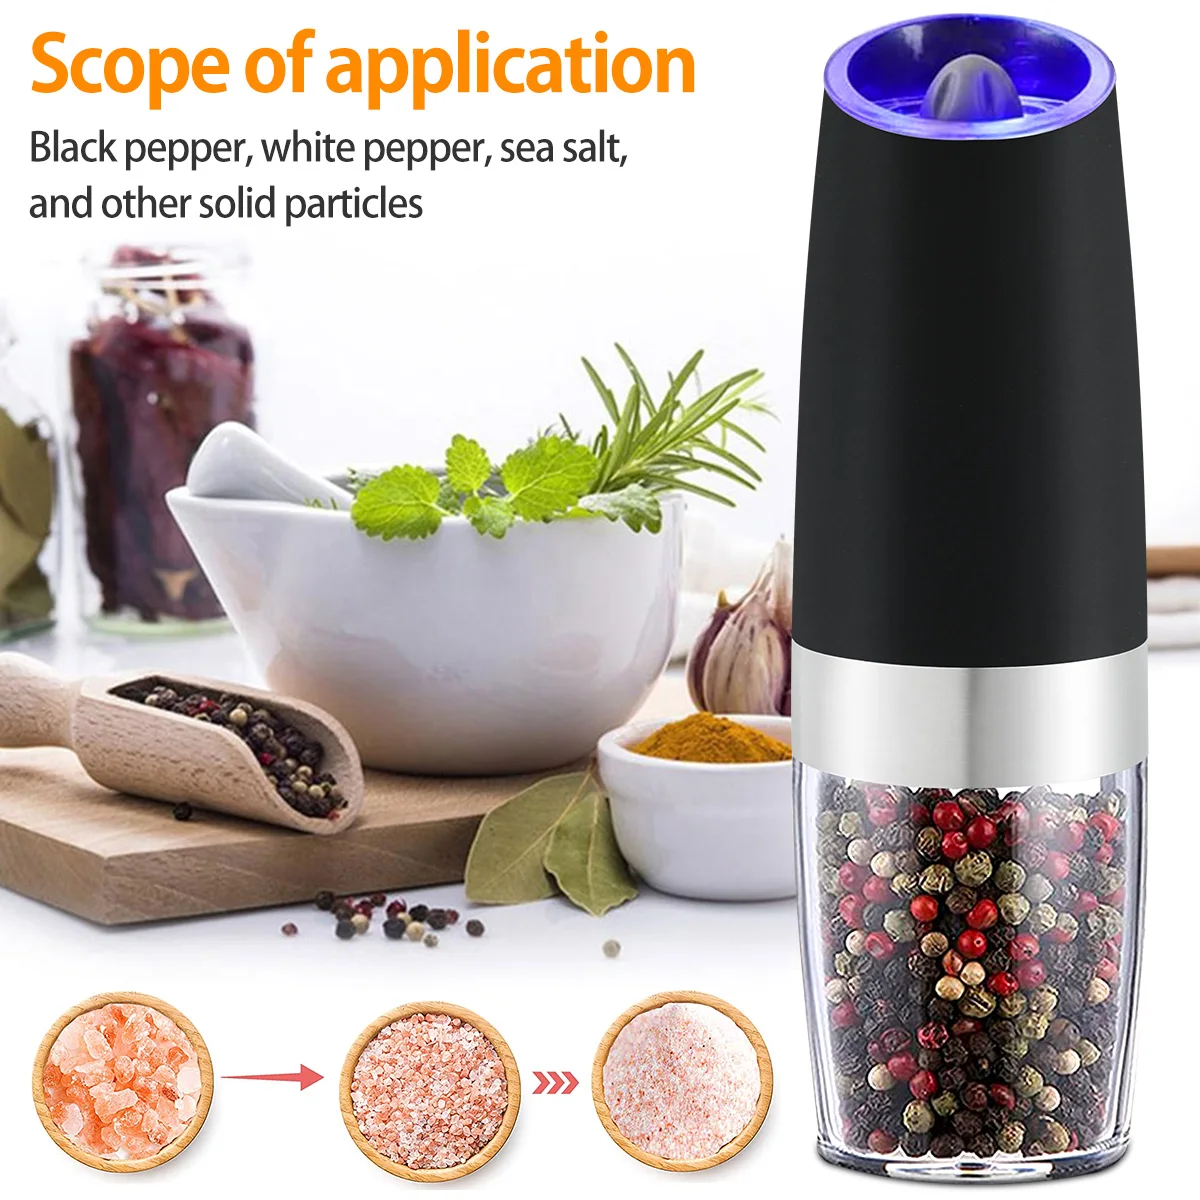 https://ae01.alicdn.com/kf/Se431f85d9218408b9f4e6949e6908f55Z/2pc-Electric-Pepper-Mill-Stainless-Steel-Automatic-Gravity-Shaker-Salt-and-Pepper-Grinder-Set-Spice-Mills.jpg